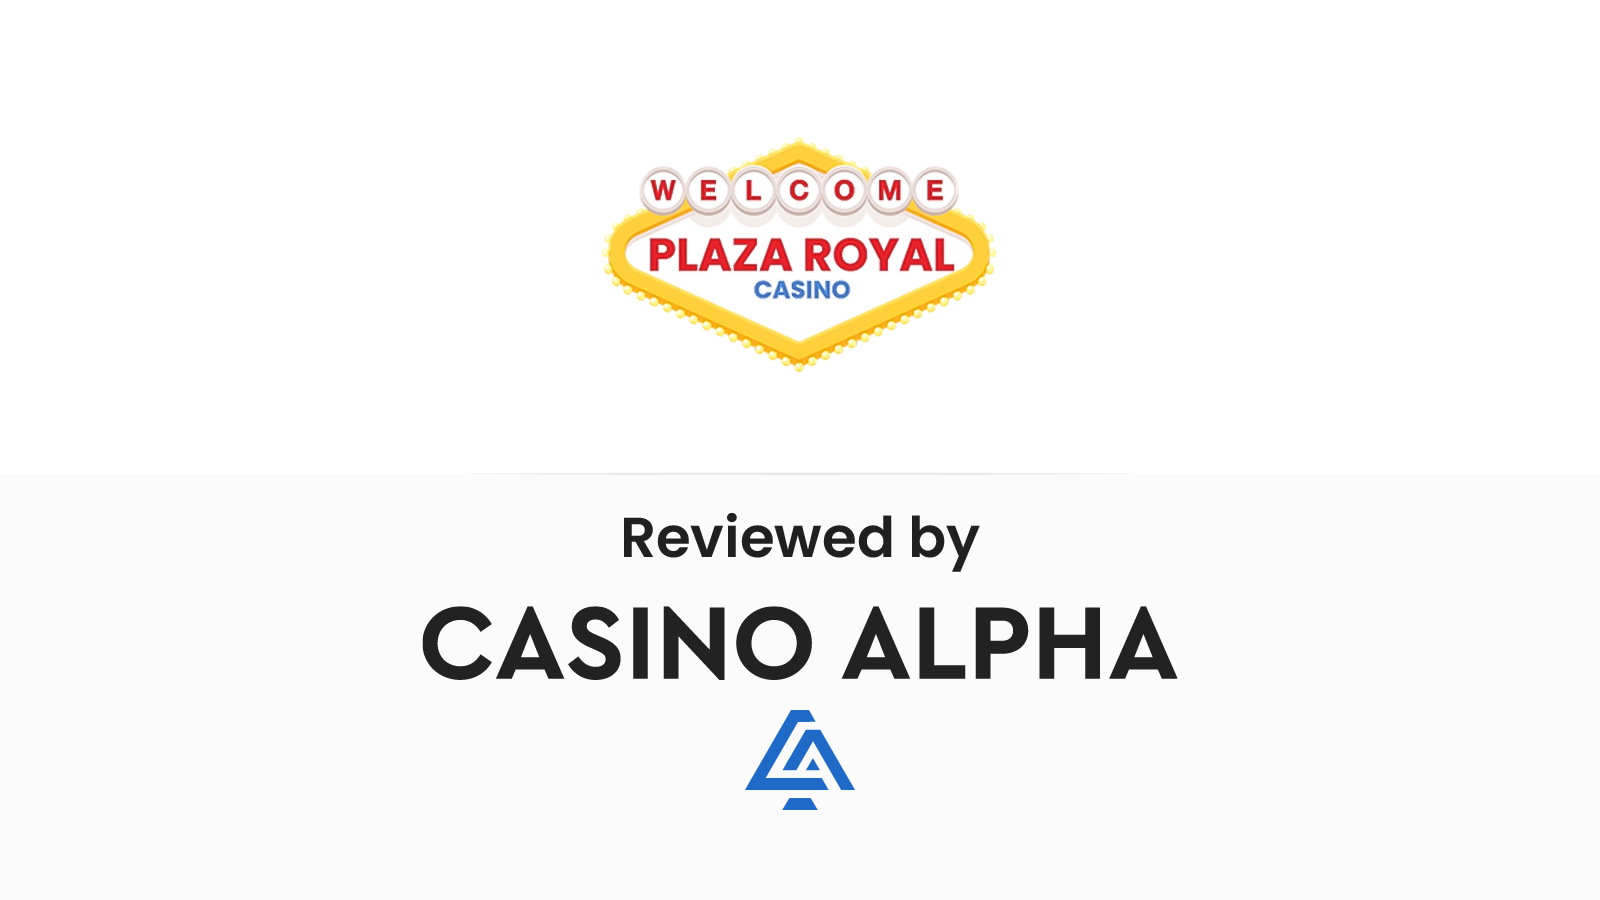 Plaza Royal Casino Review & Promotions List